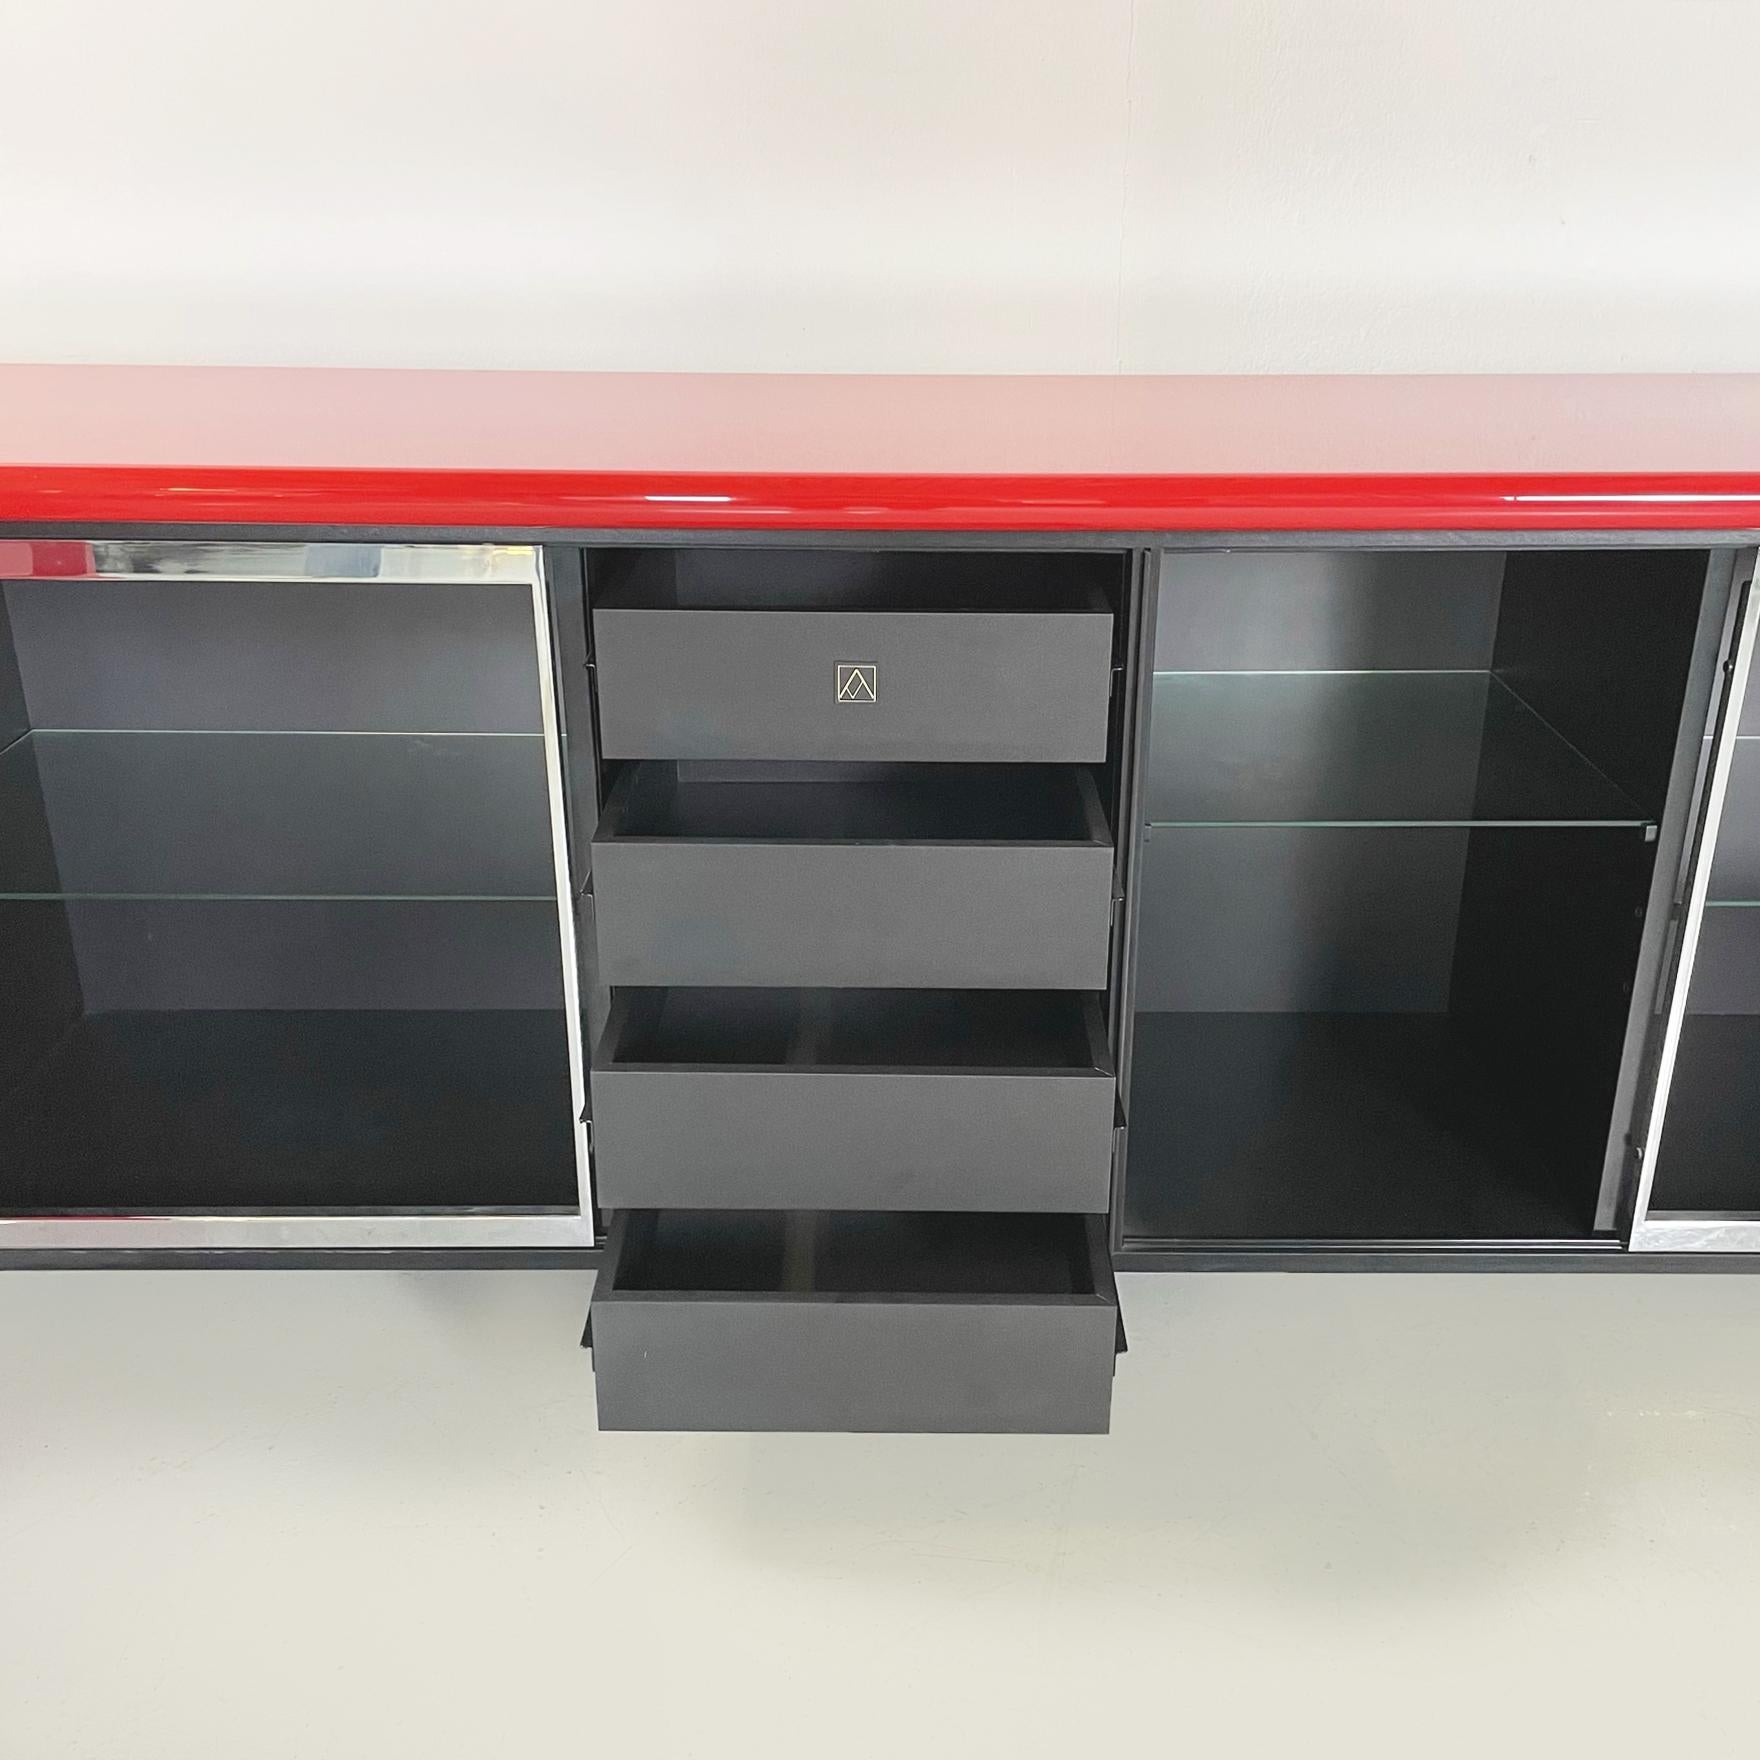 Italian Modern Red Sideboard Sheraton by Stoppino and Acerbis for Acerbis, 1977 For Sale 6